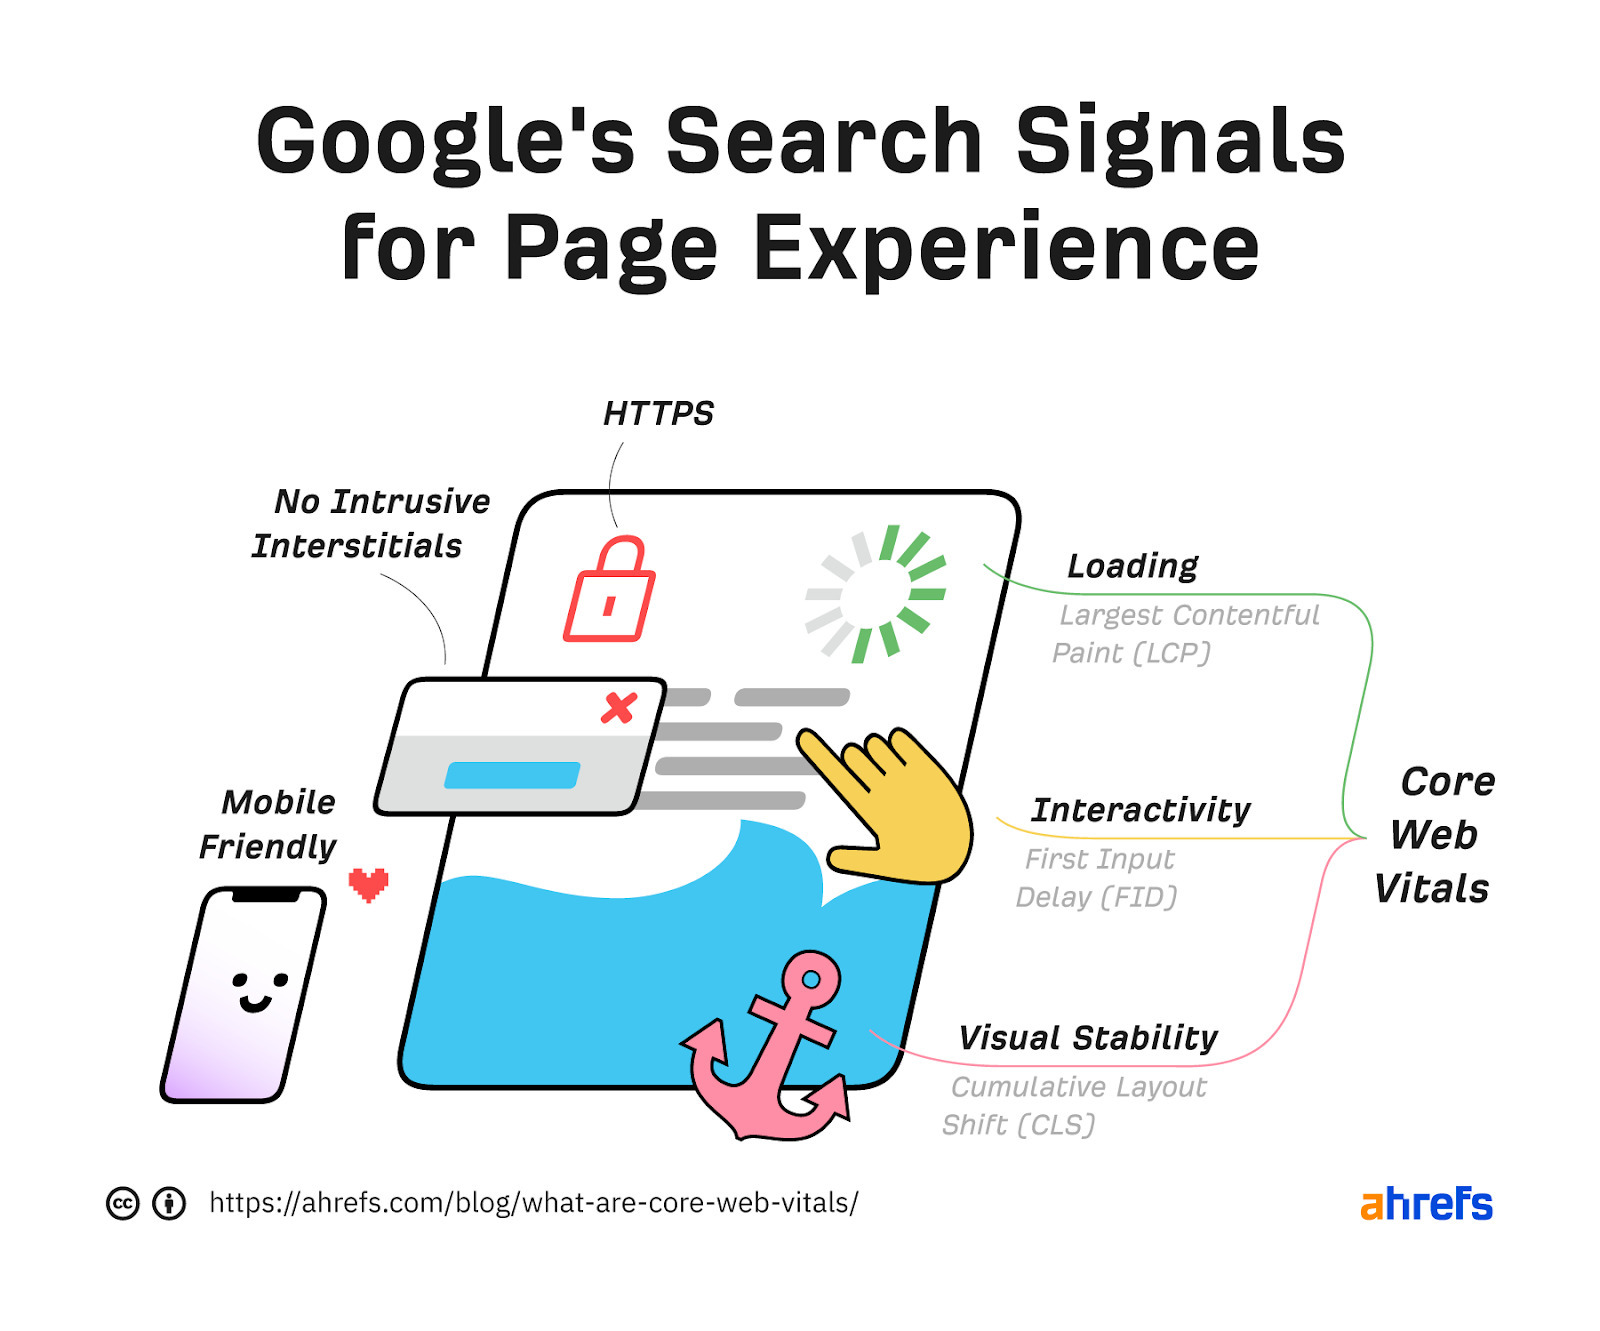 Google's Page Experience signals include https, no intrusive interstitials, mobile-friendliness, and Core Web Vitals
